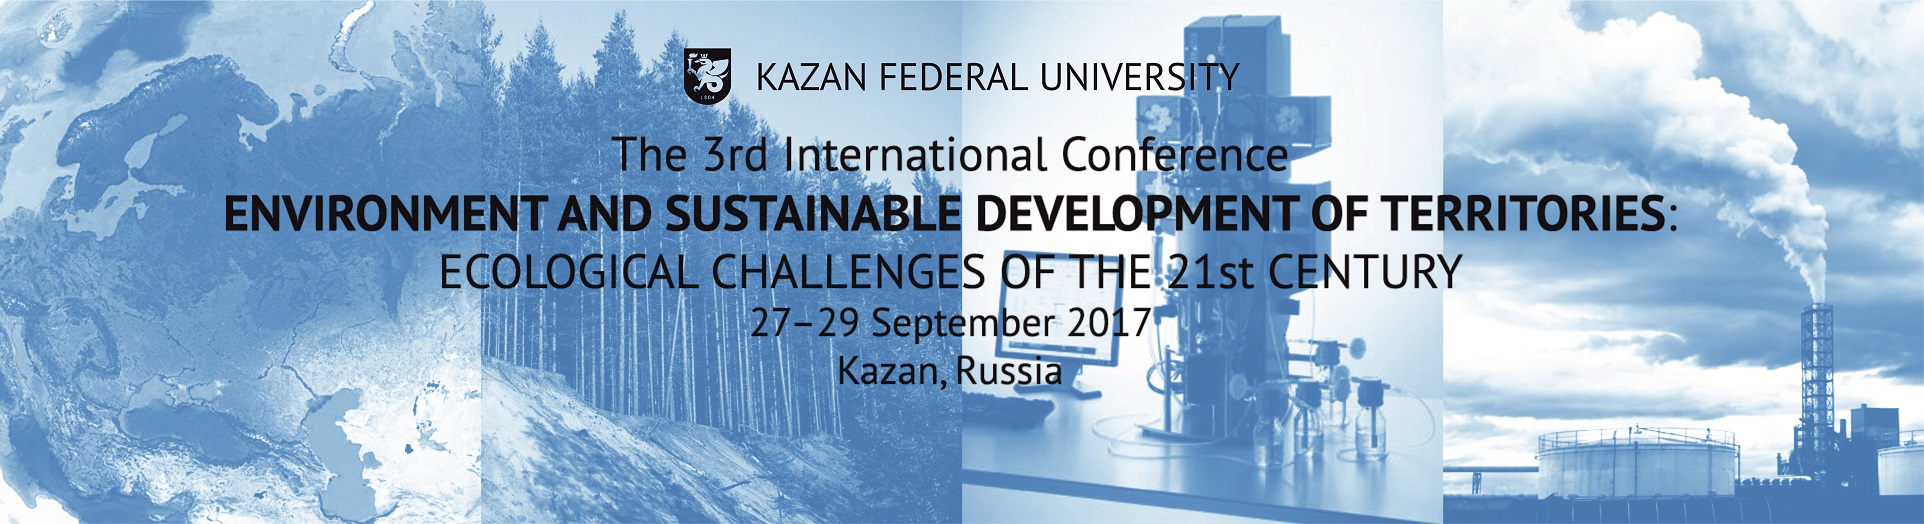 ПОРТАЛ КФУ \ Academic Units \ Natural Sciences \ Institute of Environmental Sciences \ Environment and Sustainable Development of Territories: Ecological Challenges of the 21st Century \ Program